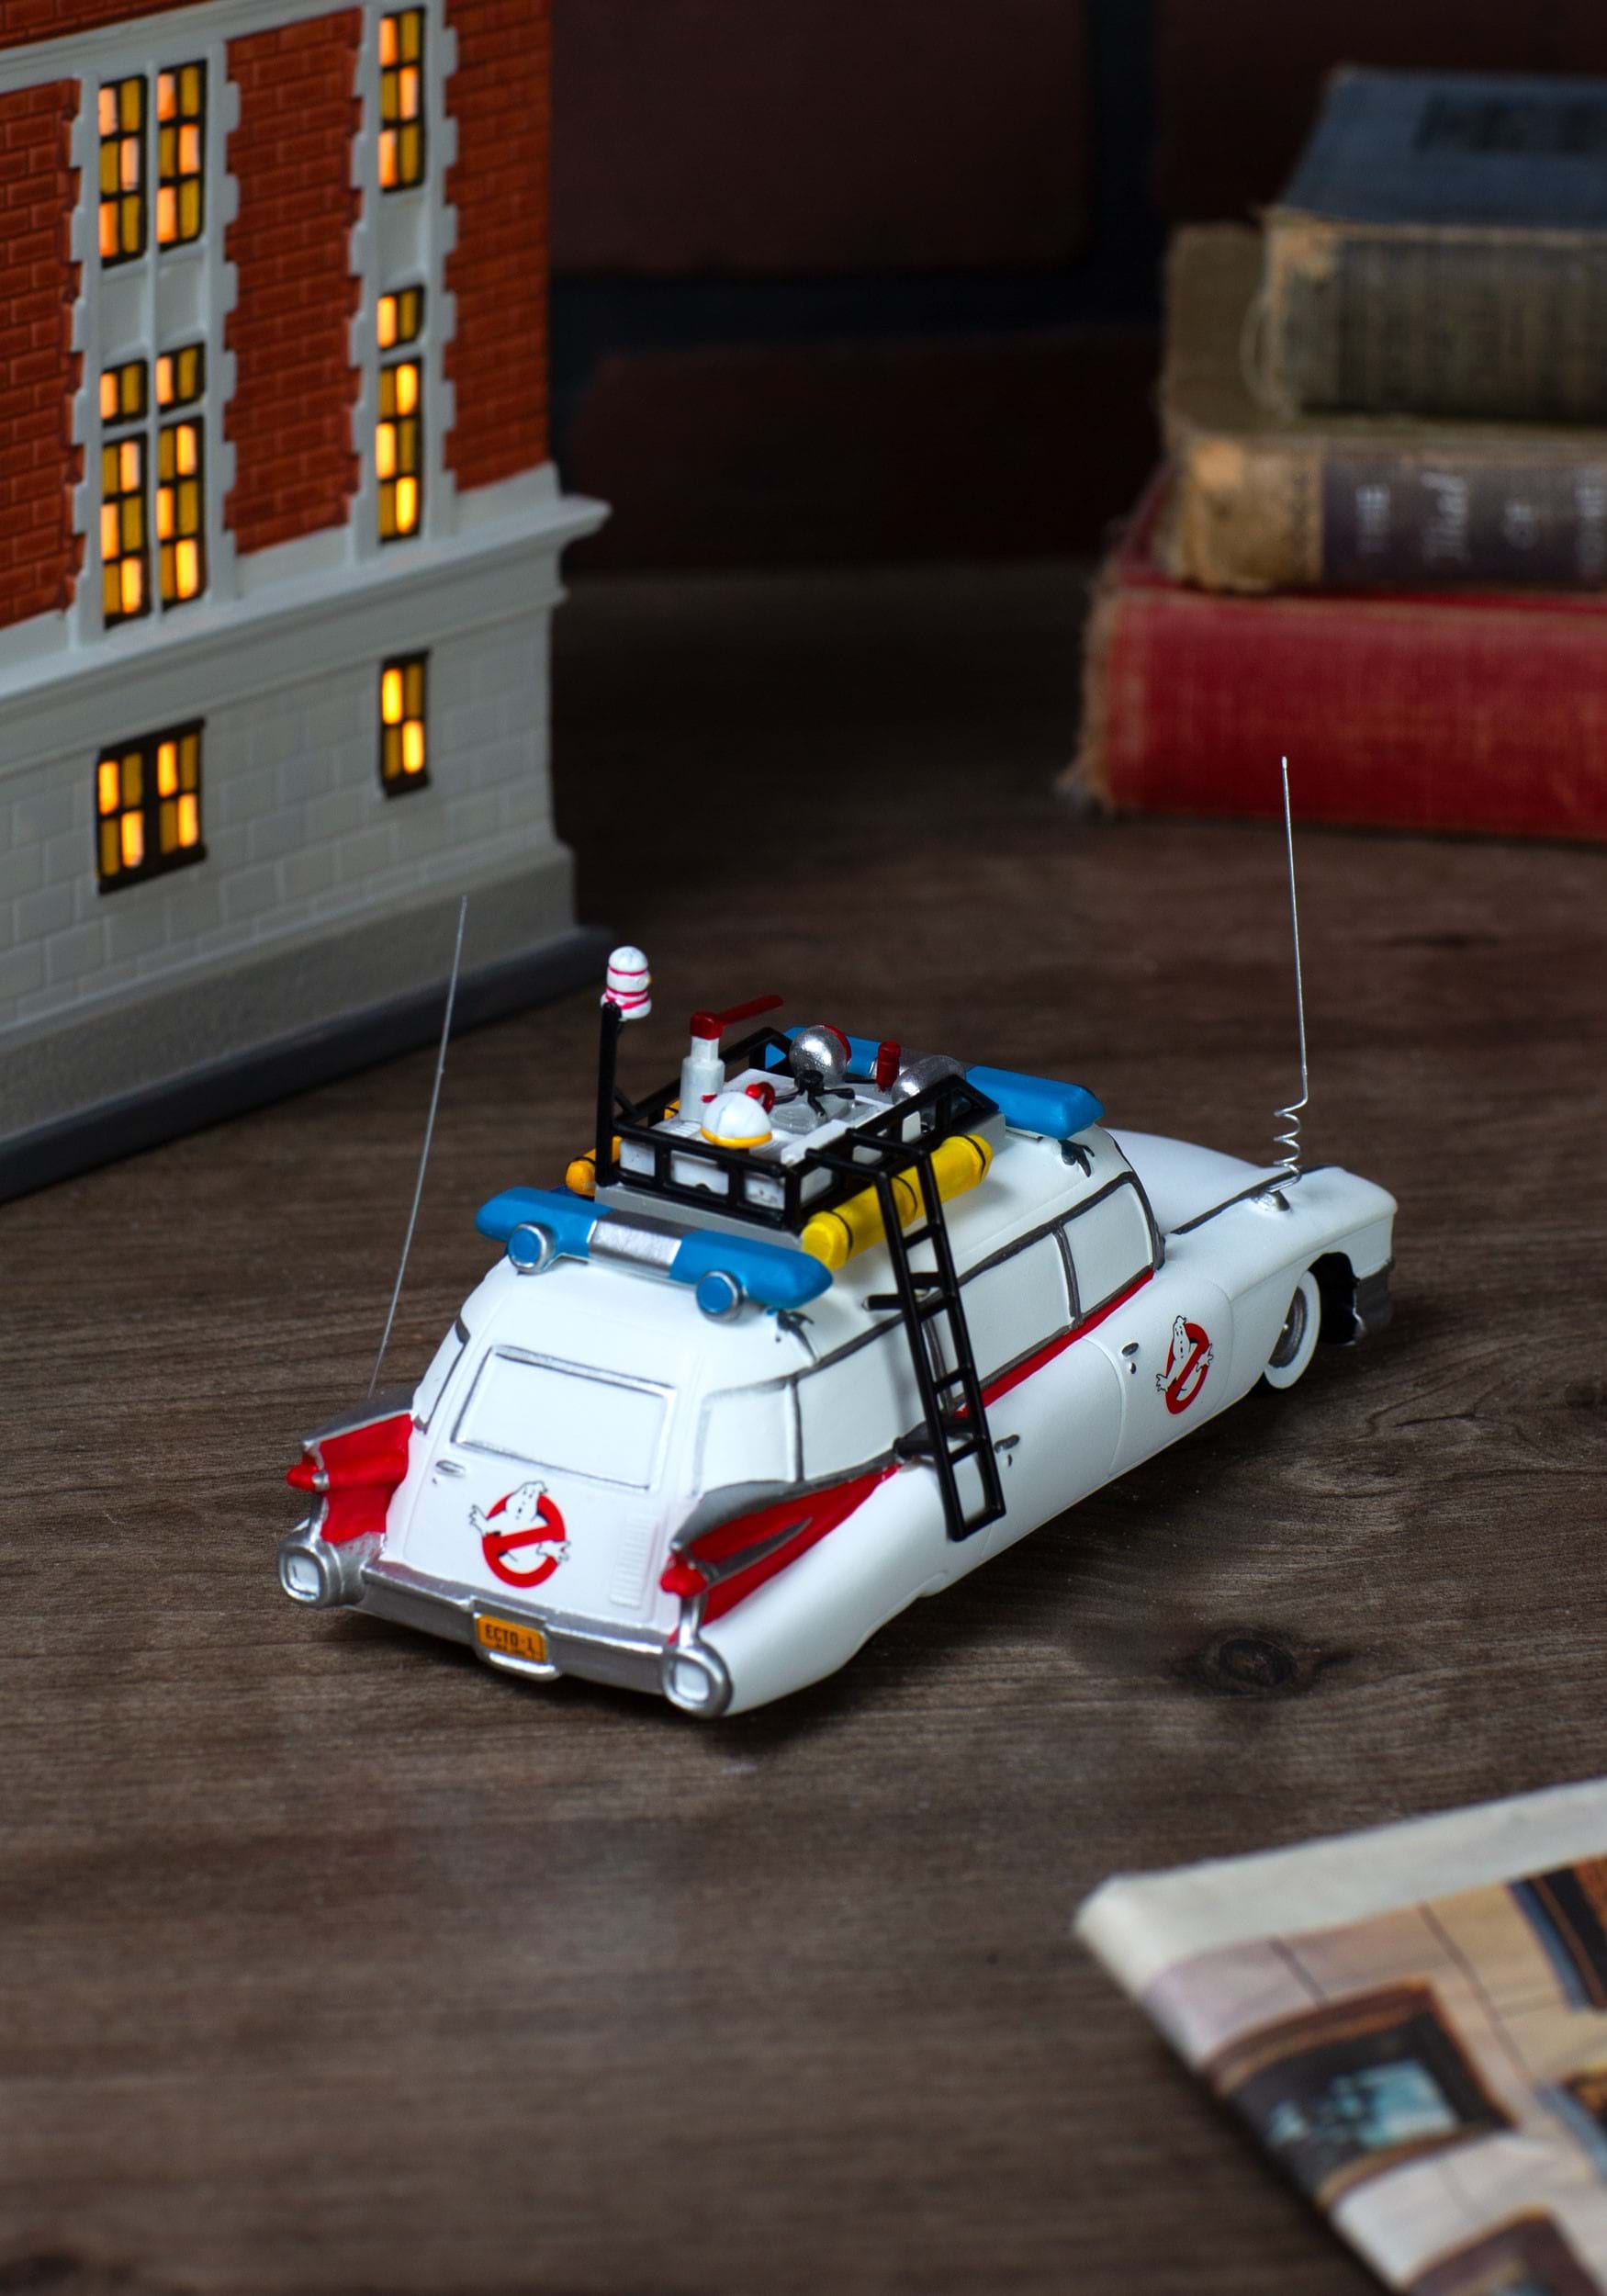 Department 56 Ghostbusters Ecto-1 Figurine